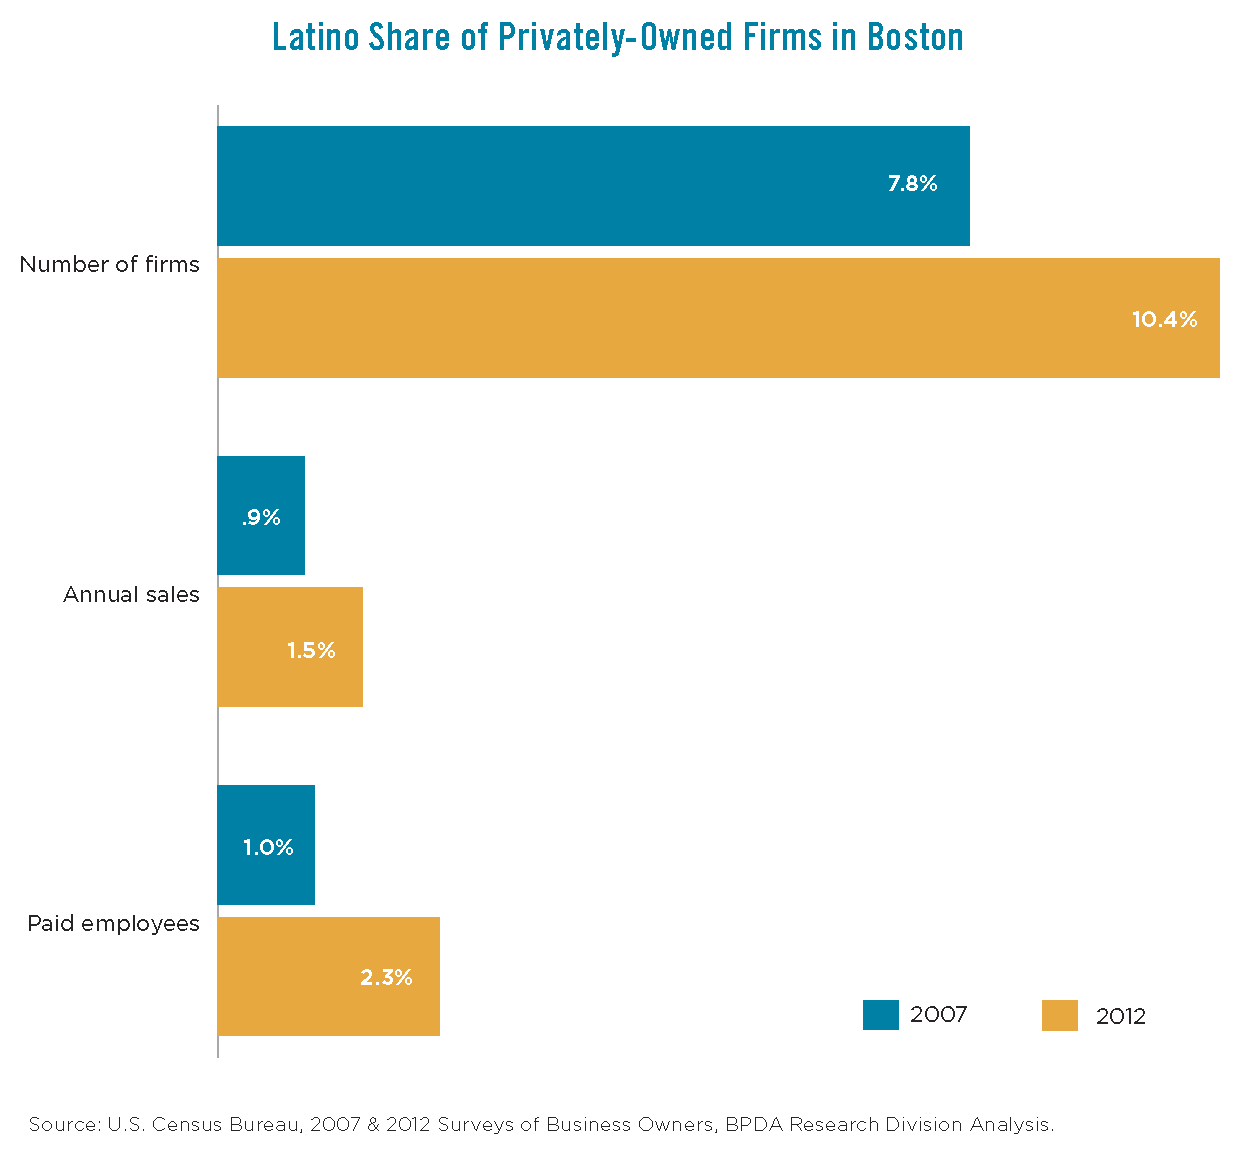 Latino Share of Privately-Owned Firms in Boston